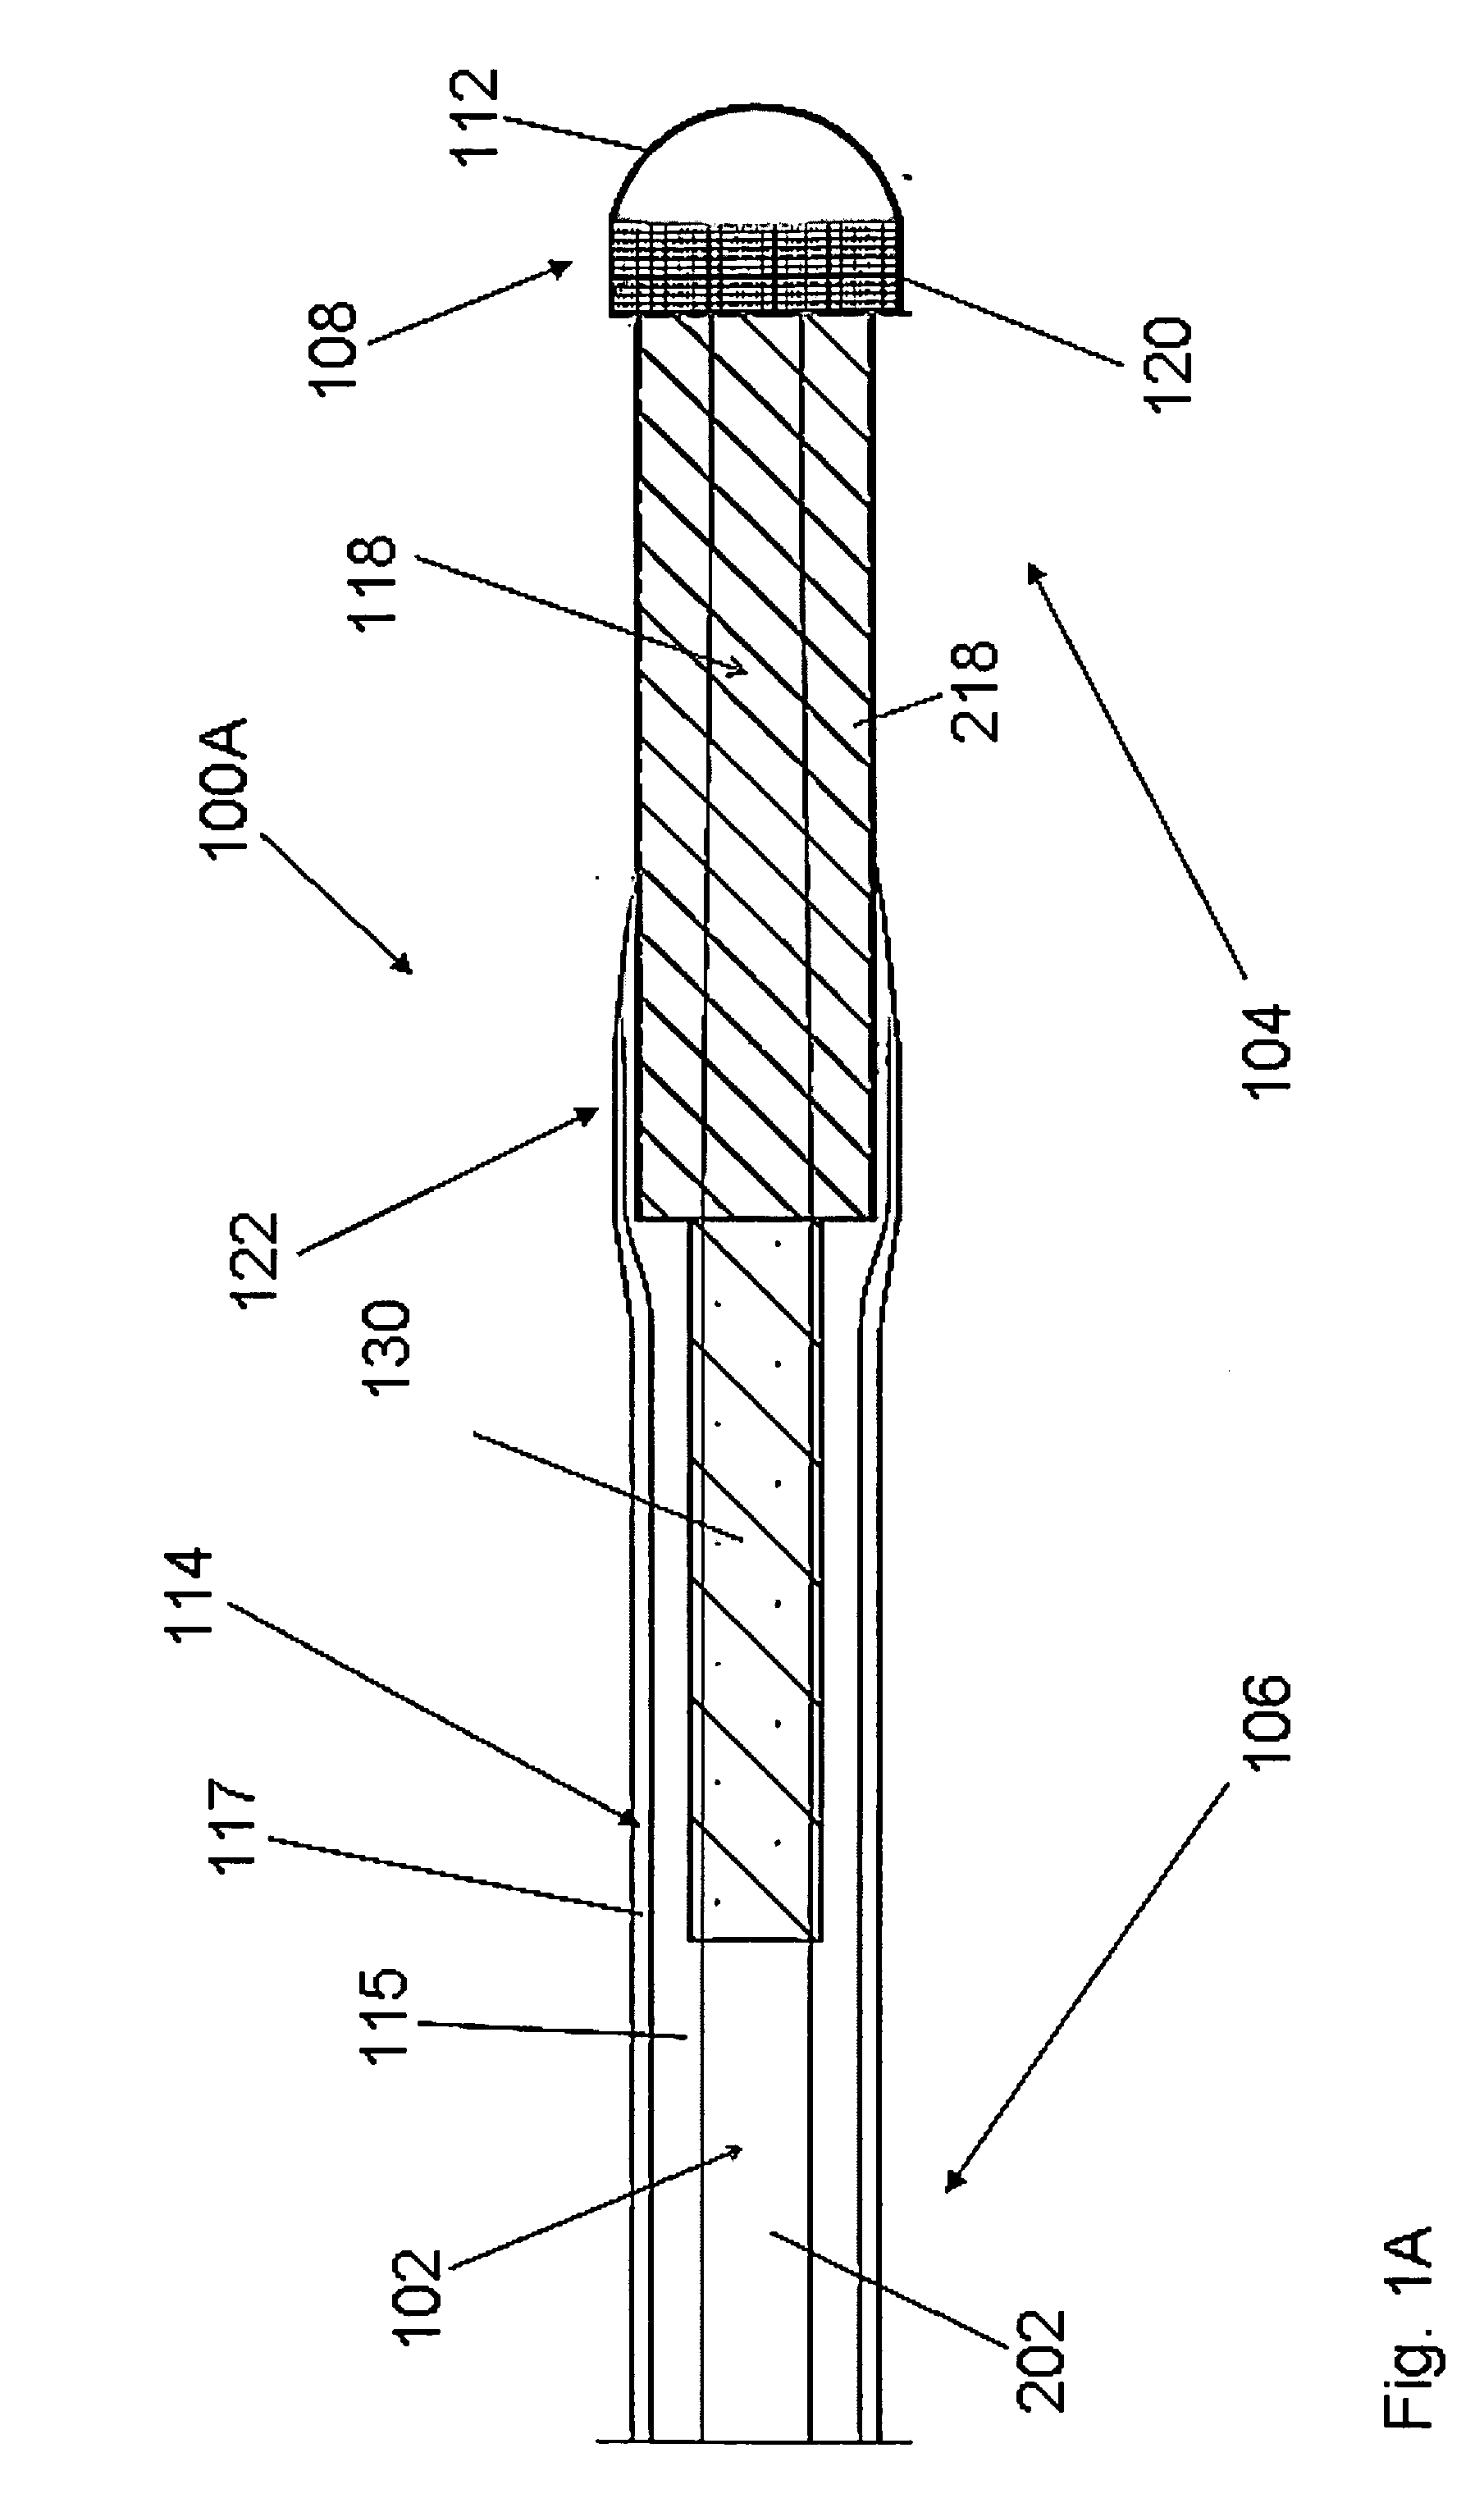 Electrosurgical device for creating a channel through a region of tissue and methods of use thereof